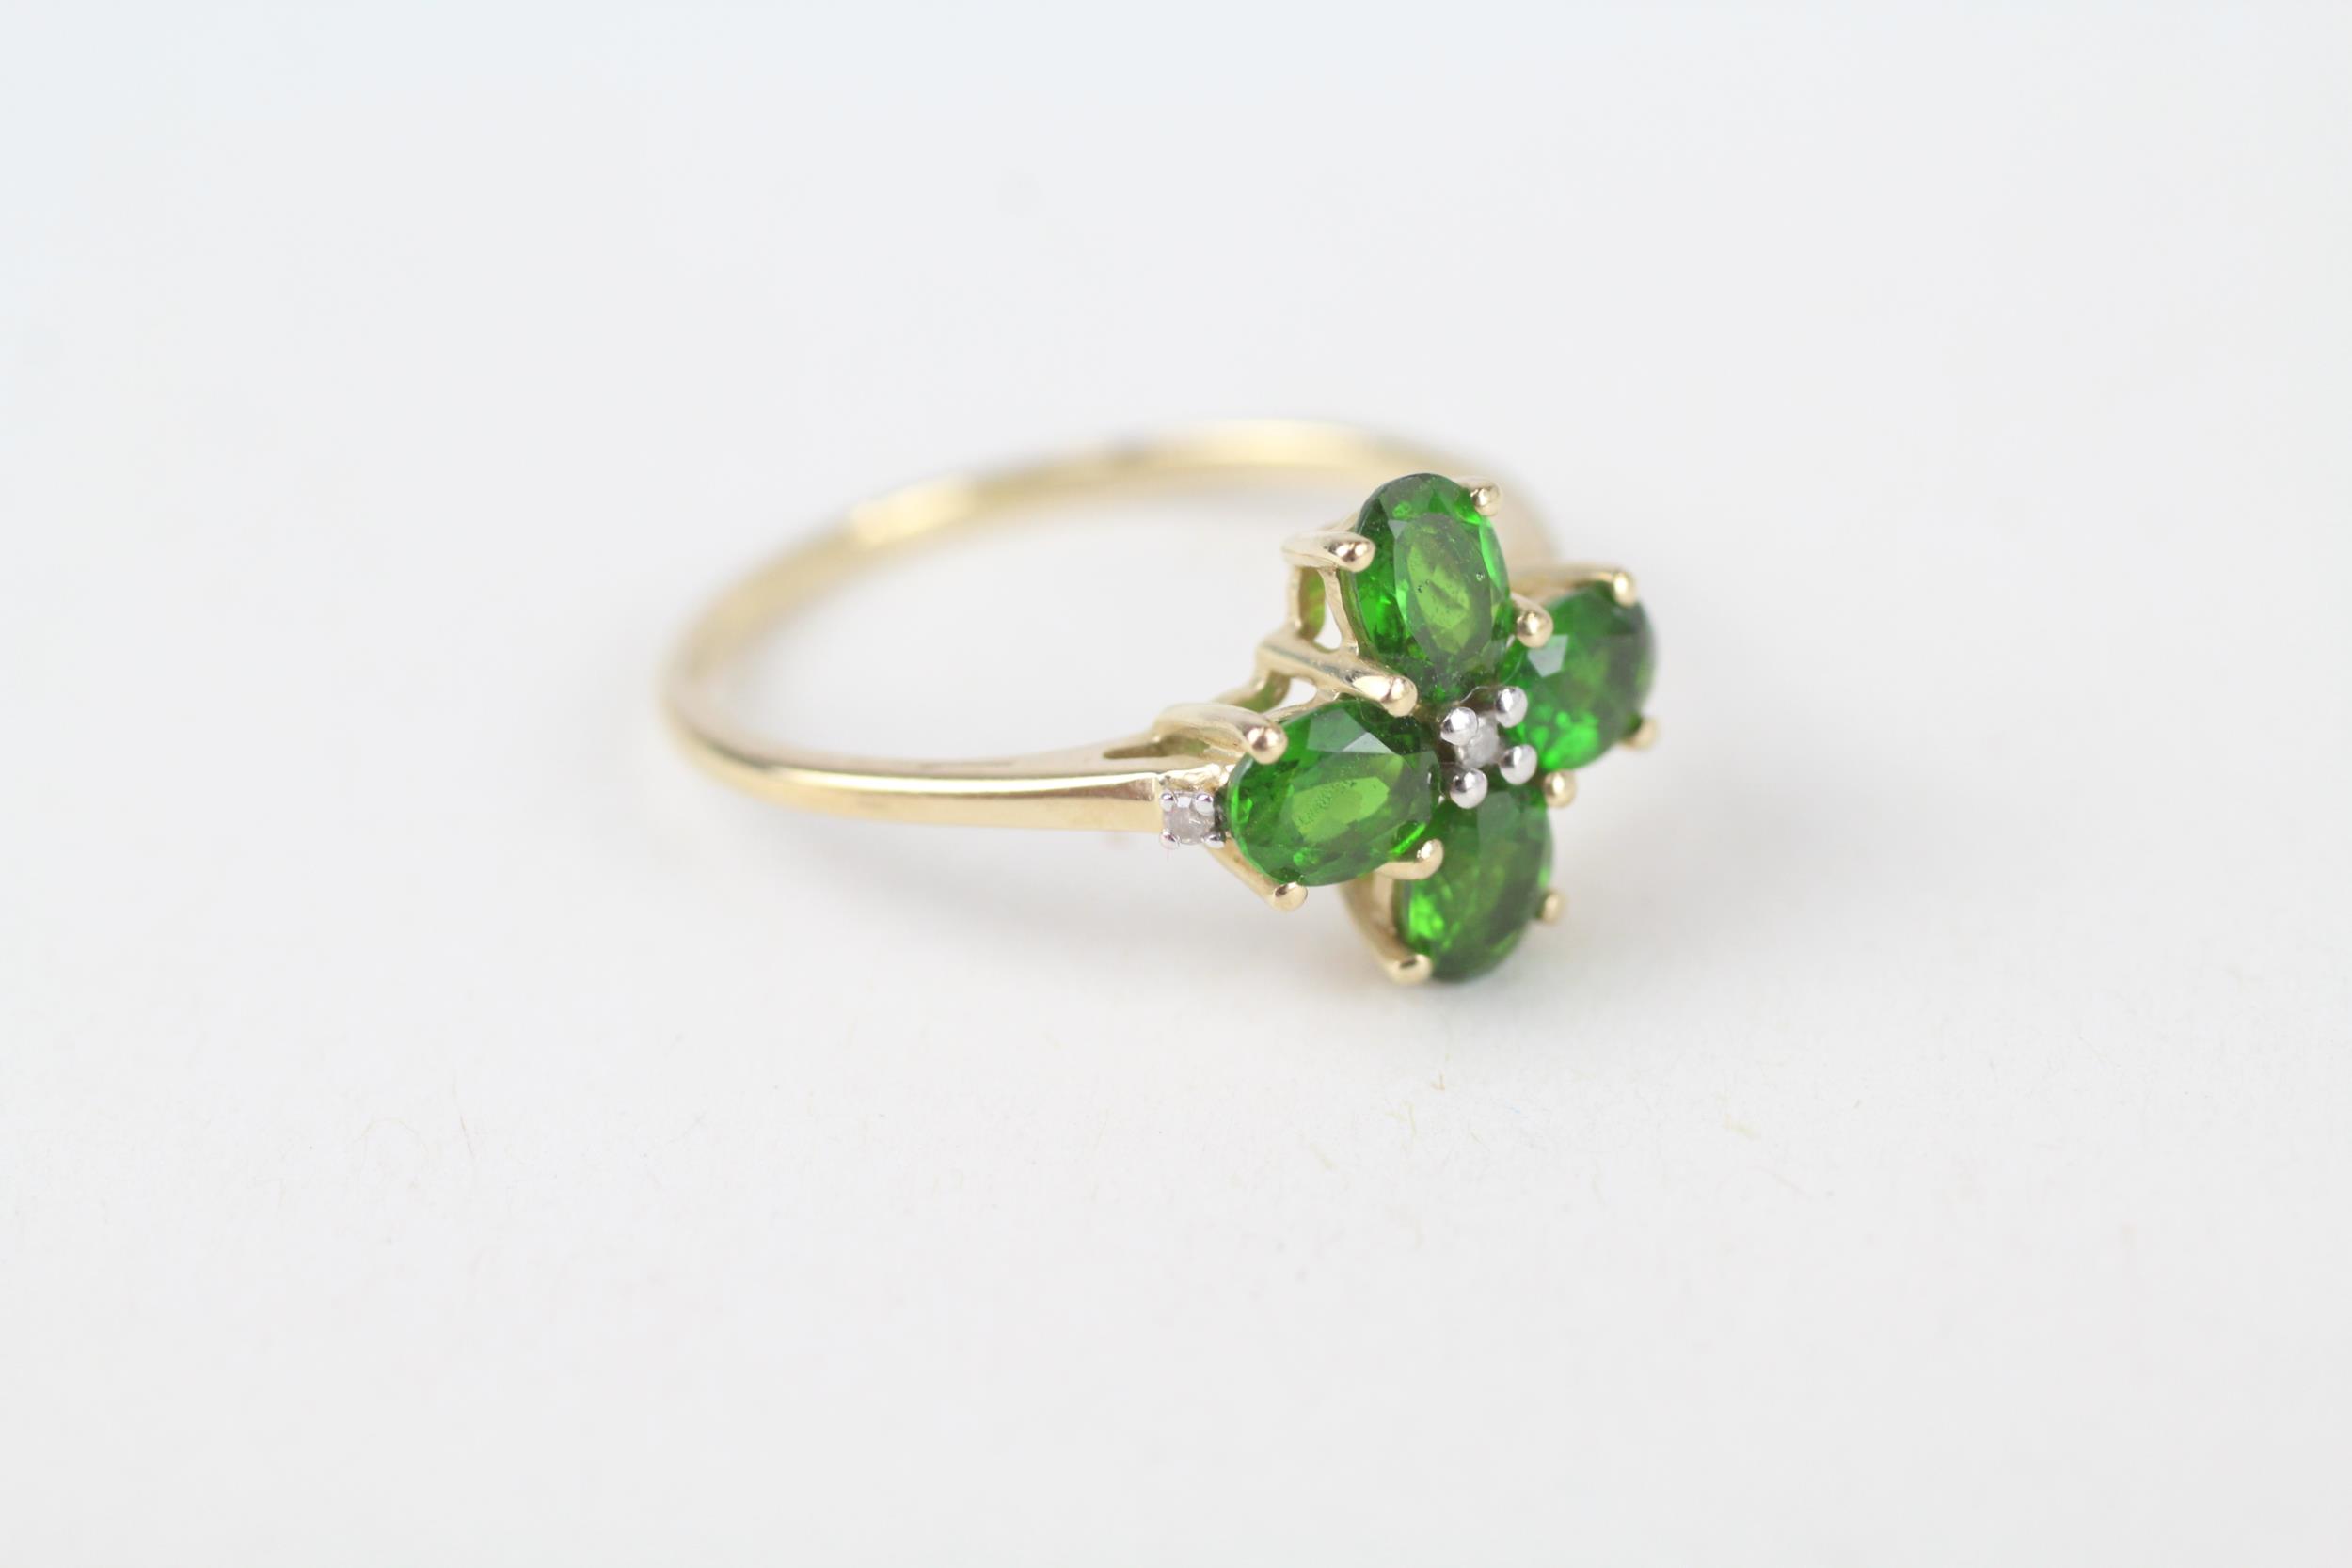 9ct gold diopside quatrefoil cluster ring with diamond accent Size R 1/2 2.1 g - Image 2 of 4